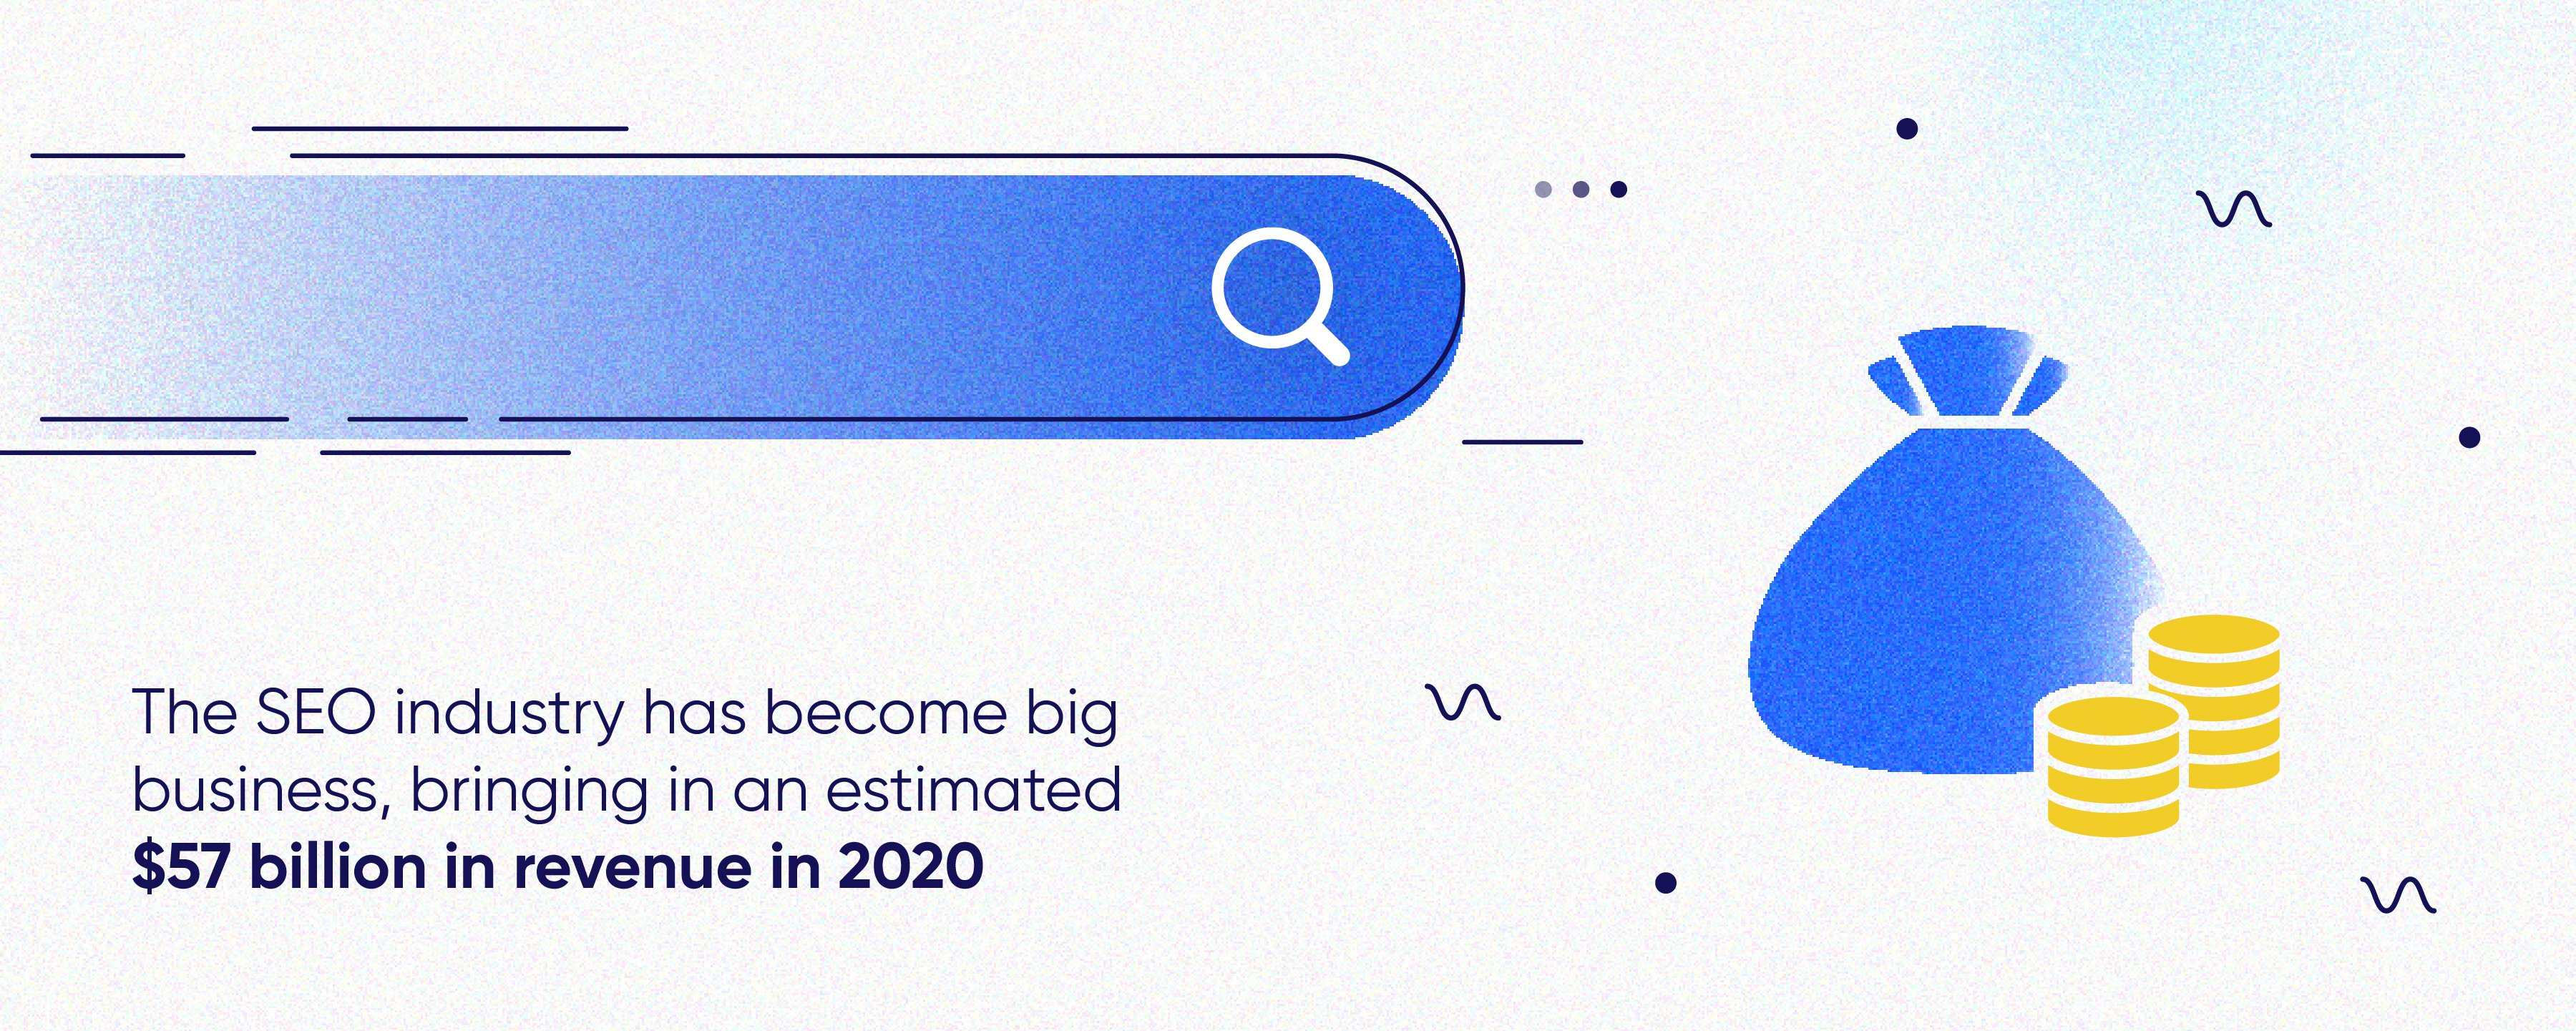 An illustration of a bag of coins next to a search bar icon with the text "The SEO industry has become a big business, bringing in an estimated $57 billion in revenue in 2020"